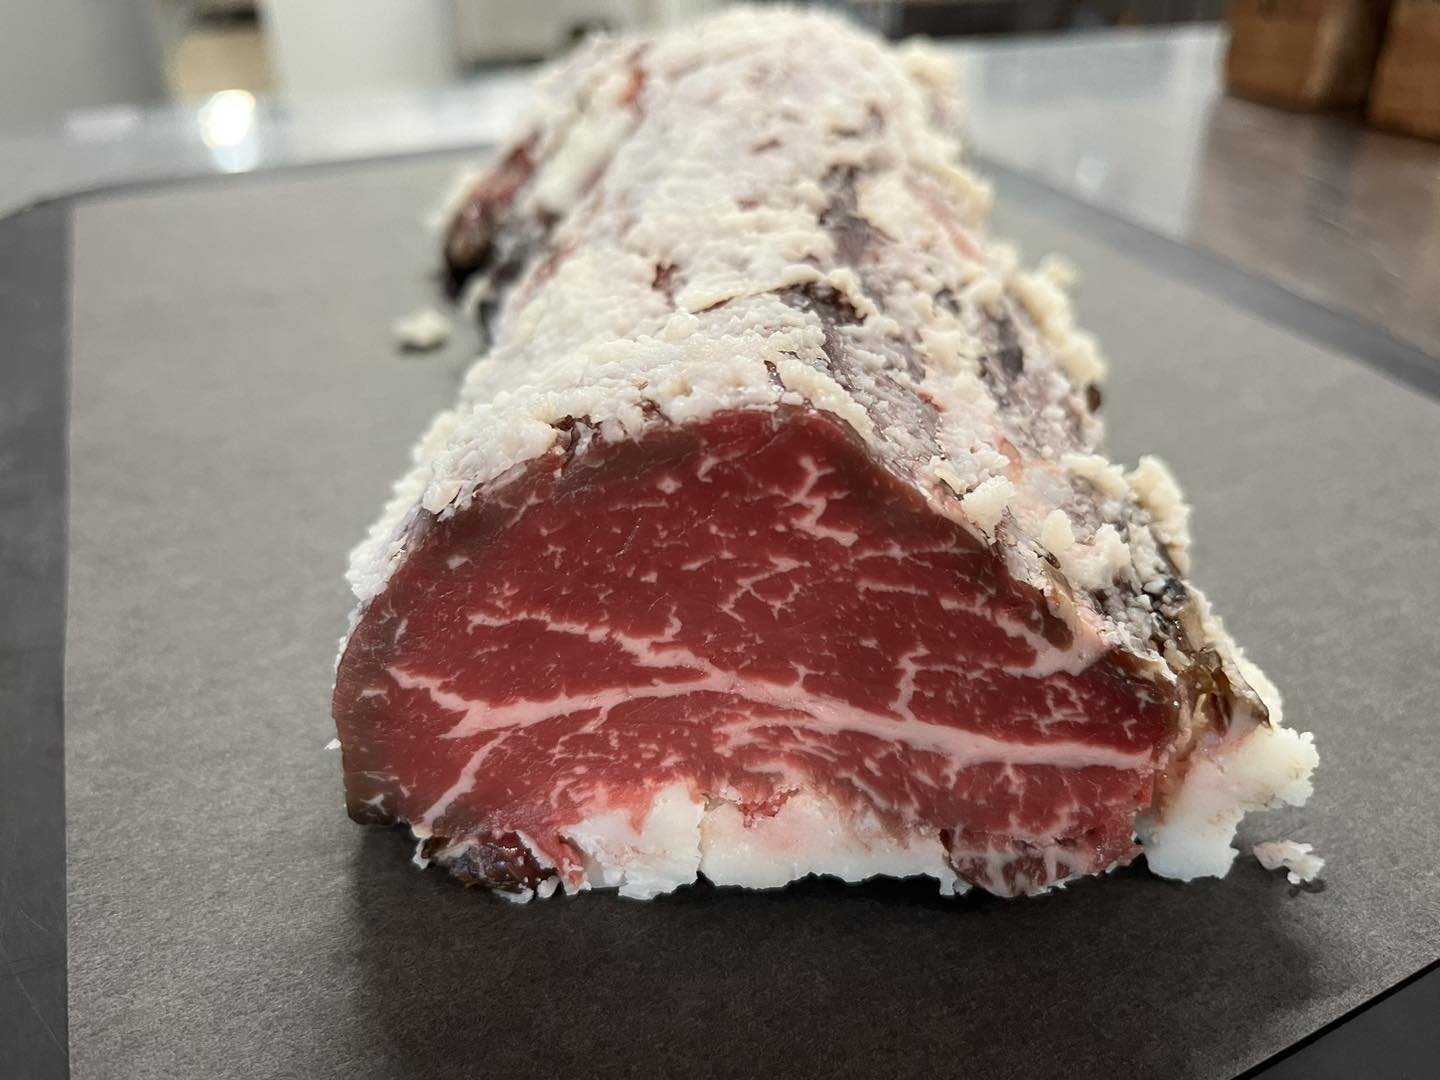 Tallow rubbed prime dry aged beef tenderloin! 
Try to say that 3 times fast?
#agedsteak #butcher #grill #grillmaster #grilling #steak #steakdinner